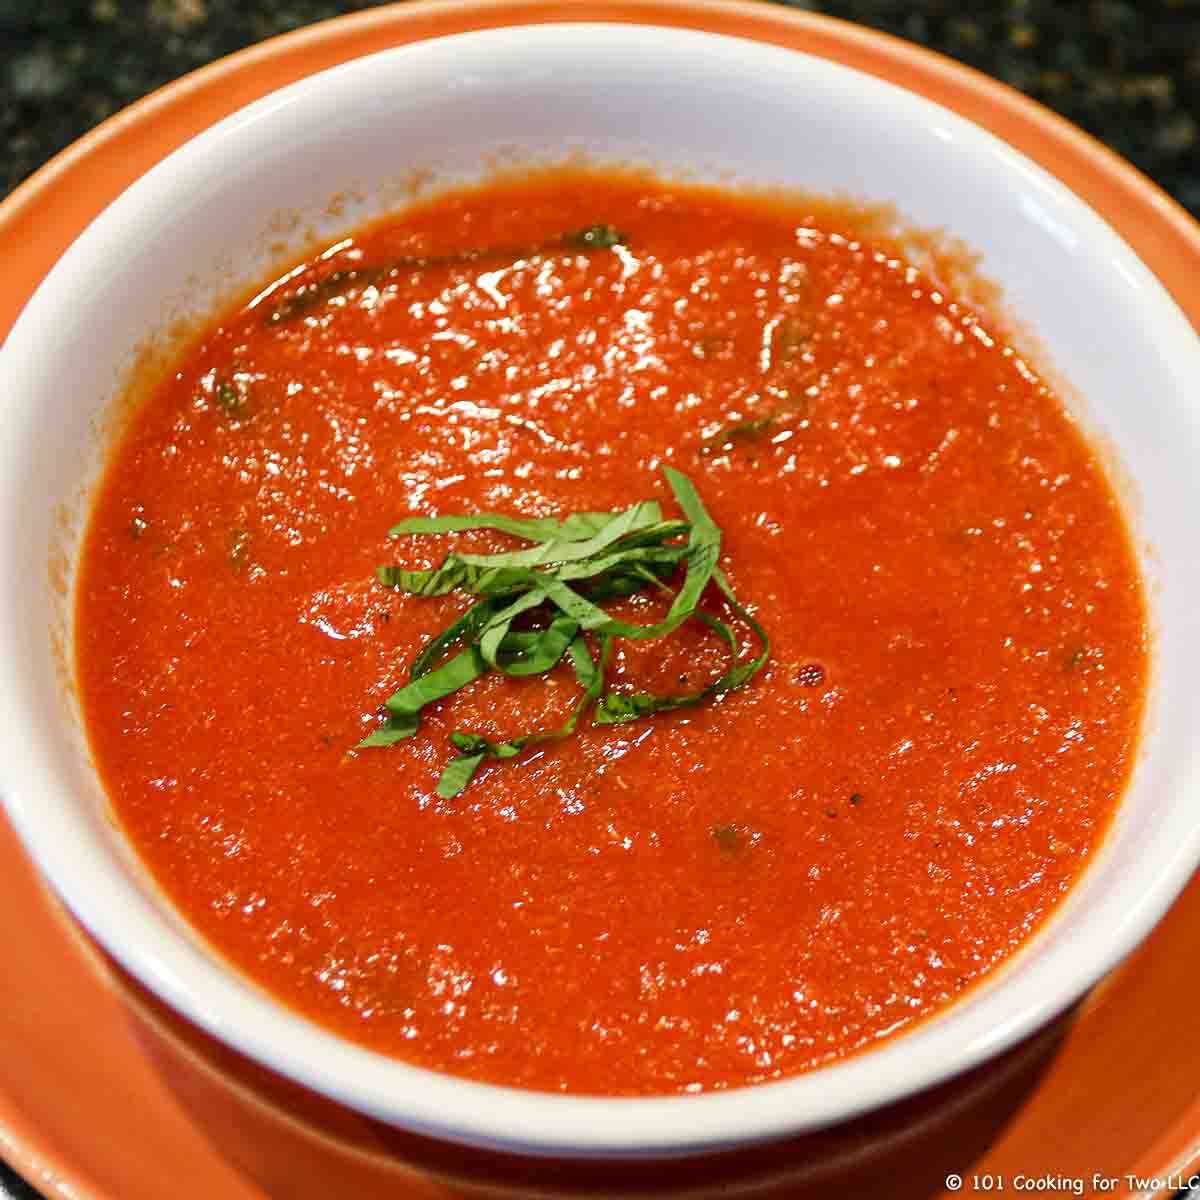 A bowl of tomato basil soup in a white bowl on orange plate.